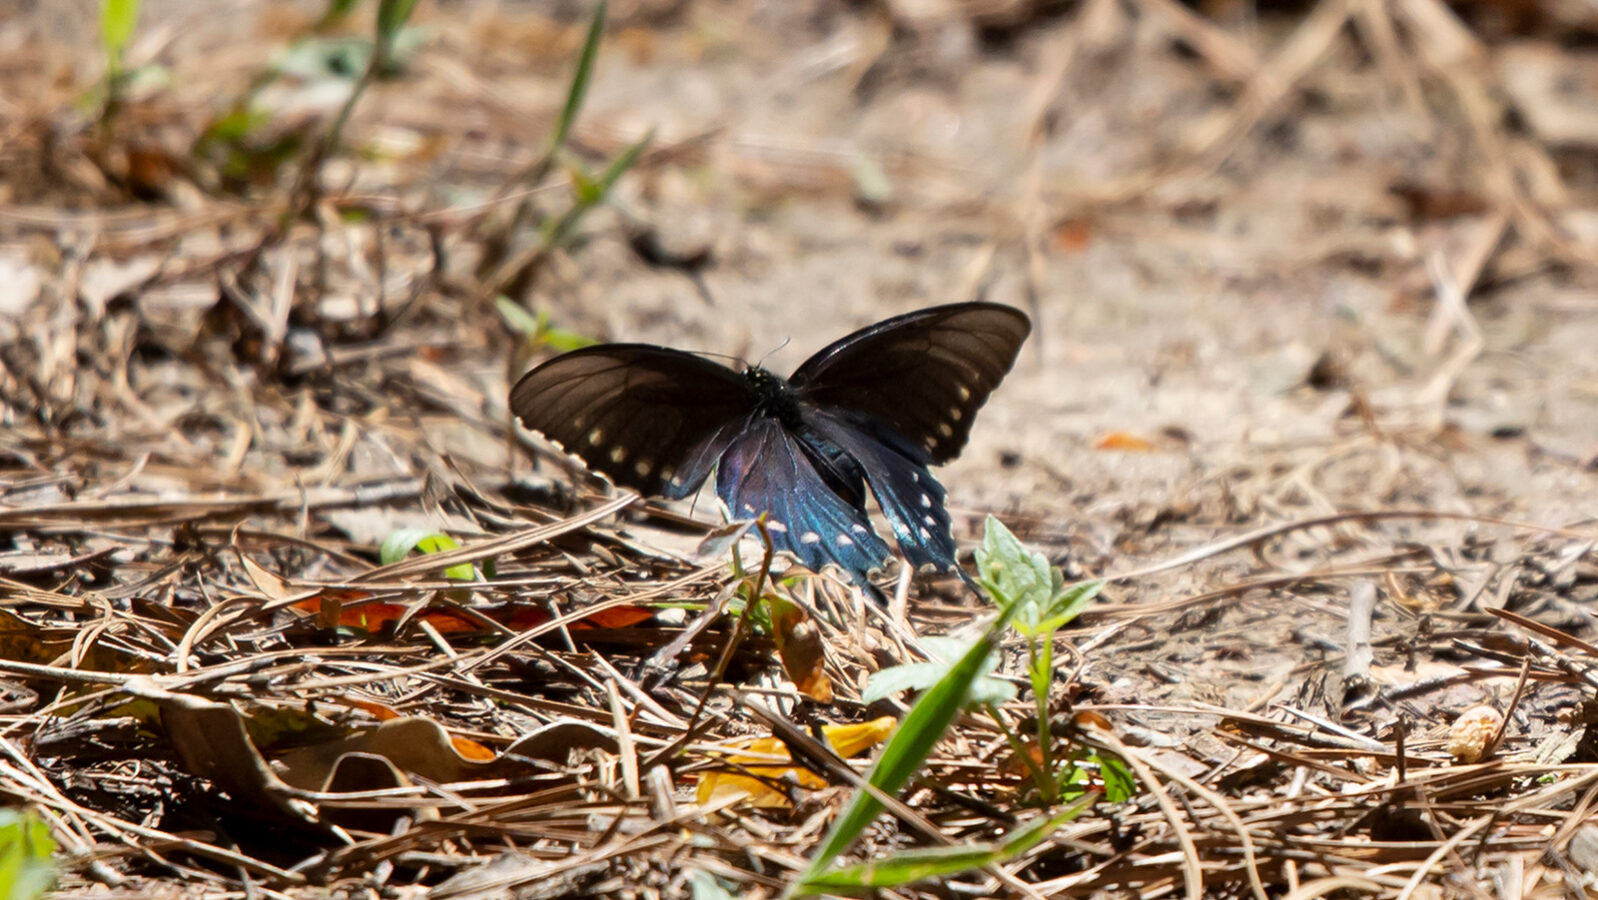 Pipevine swallowtail butterfly flying close to the ground